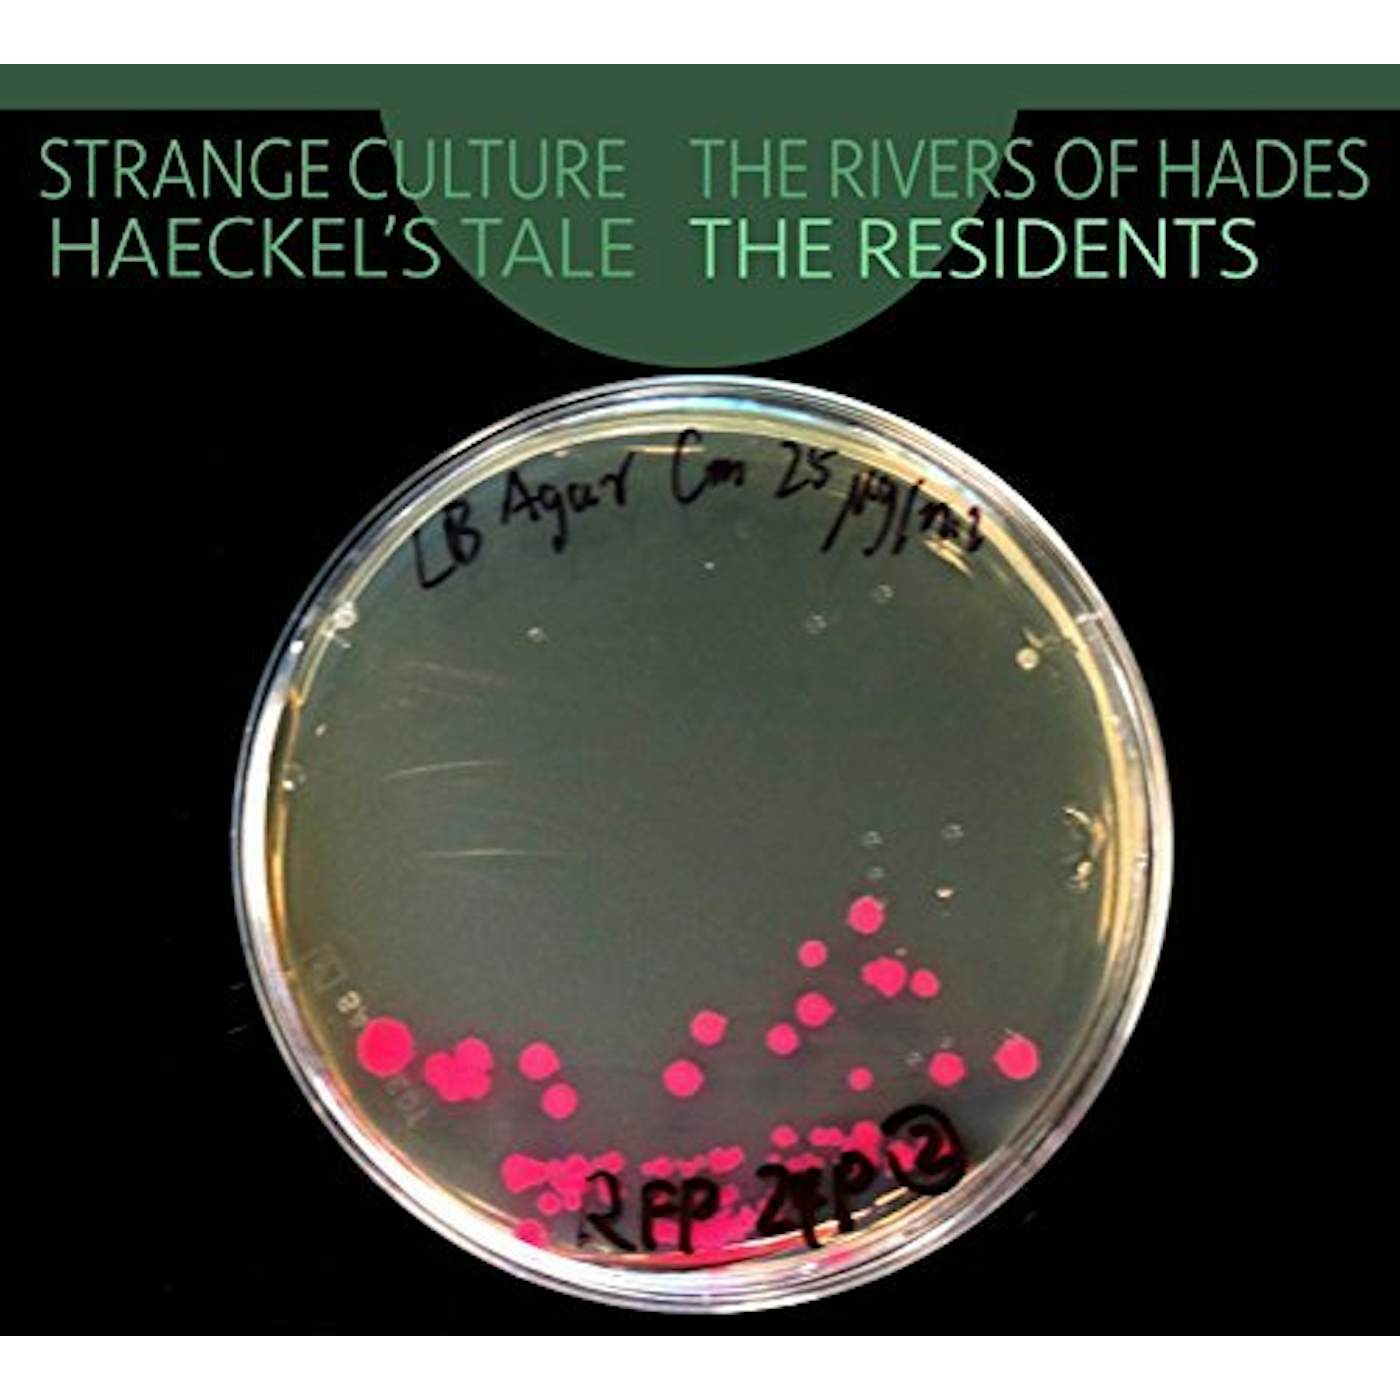 The Residents - STRANGE CULTURE / RIVERS OF HADES CD